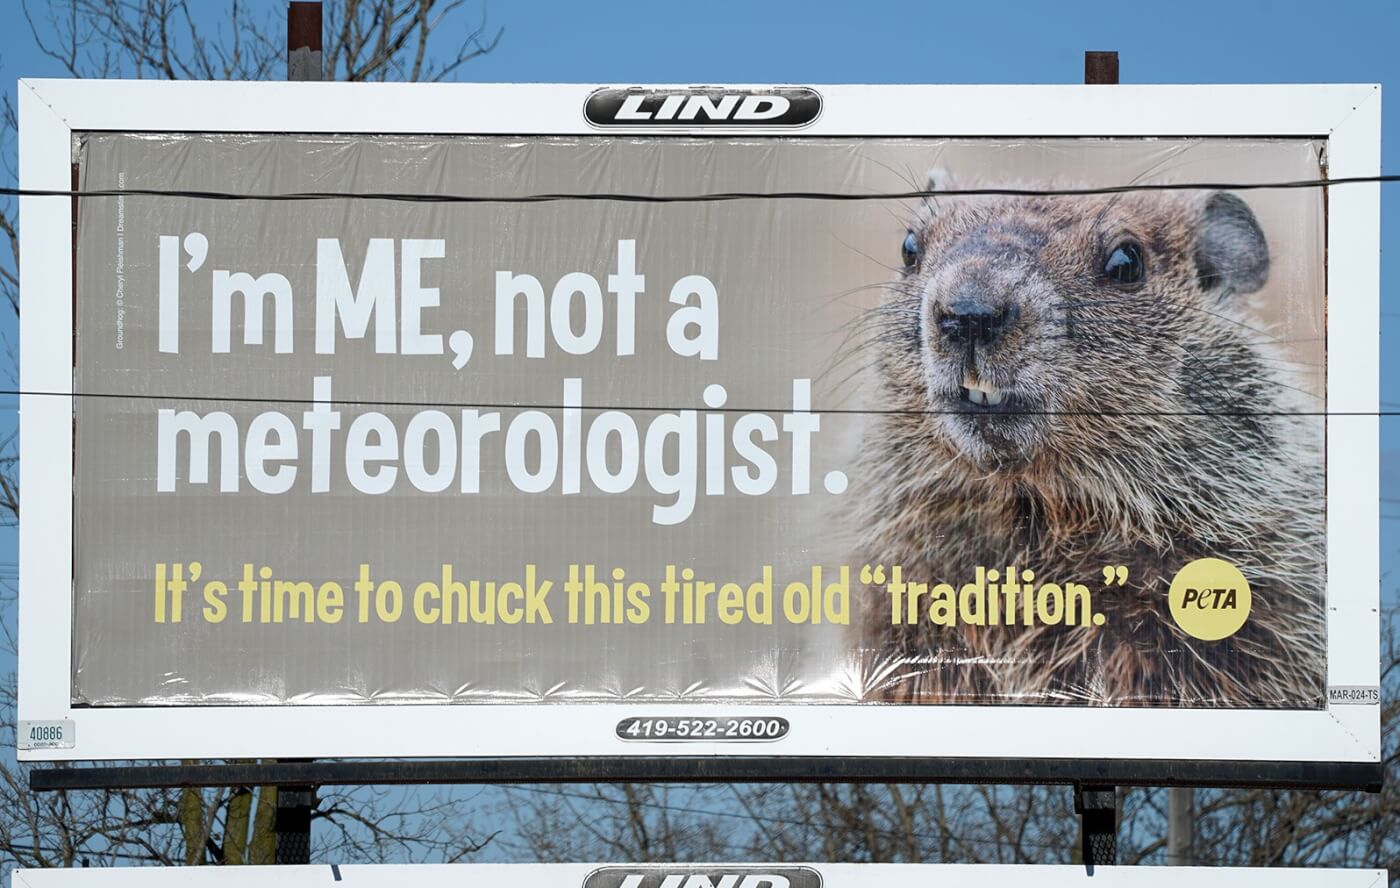 A billboard in Marion, Ohio with a photo of a groundhog reads: "I'm ME, not a meteorologist. It's time to chuck this tired old 'tradition.'"